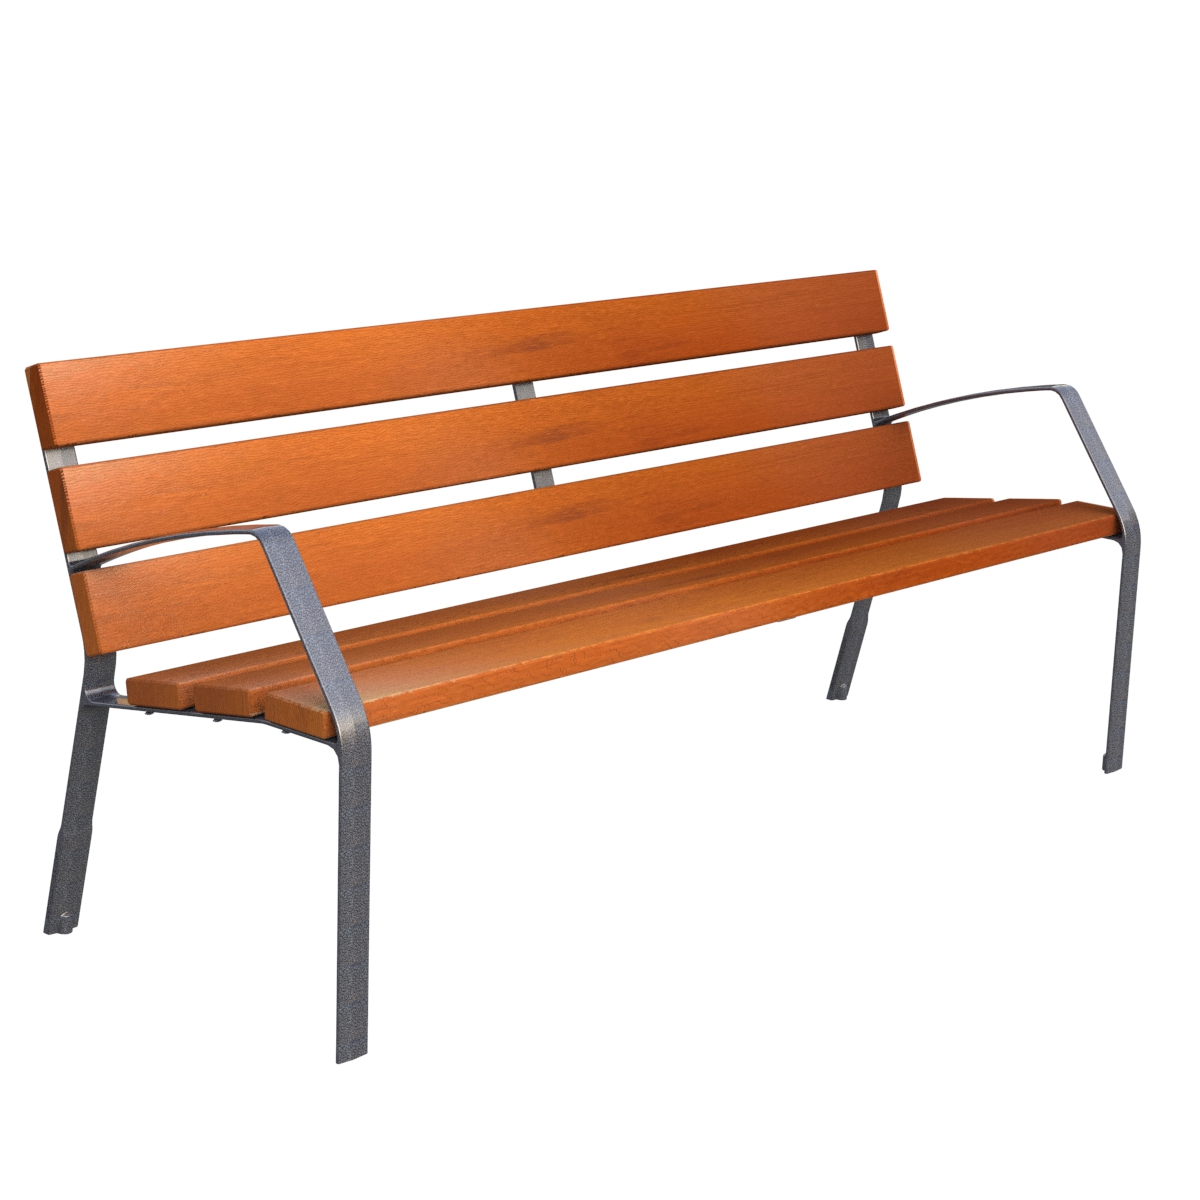 MODO08 bench in cast iron and tropical wood